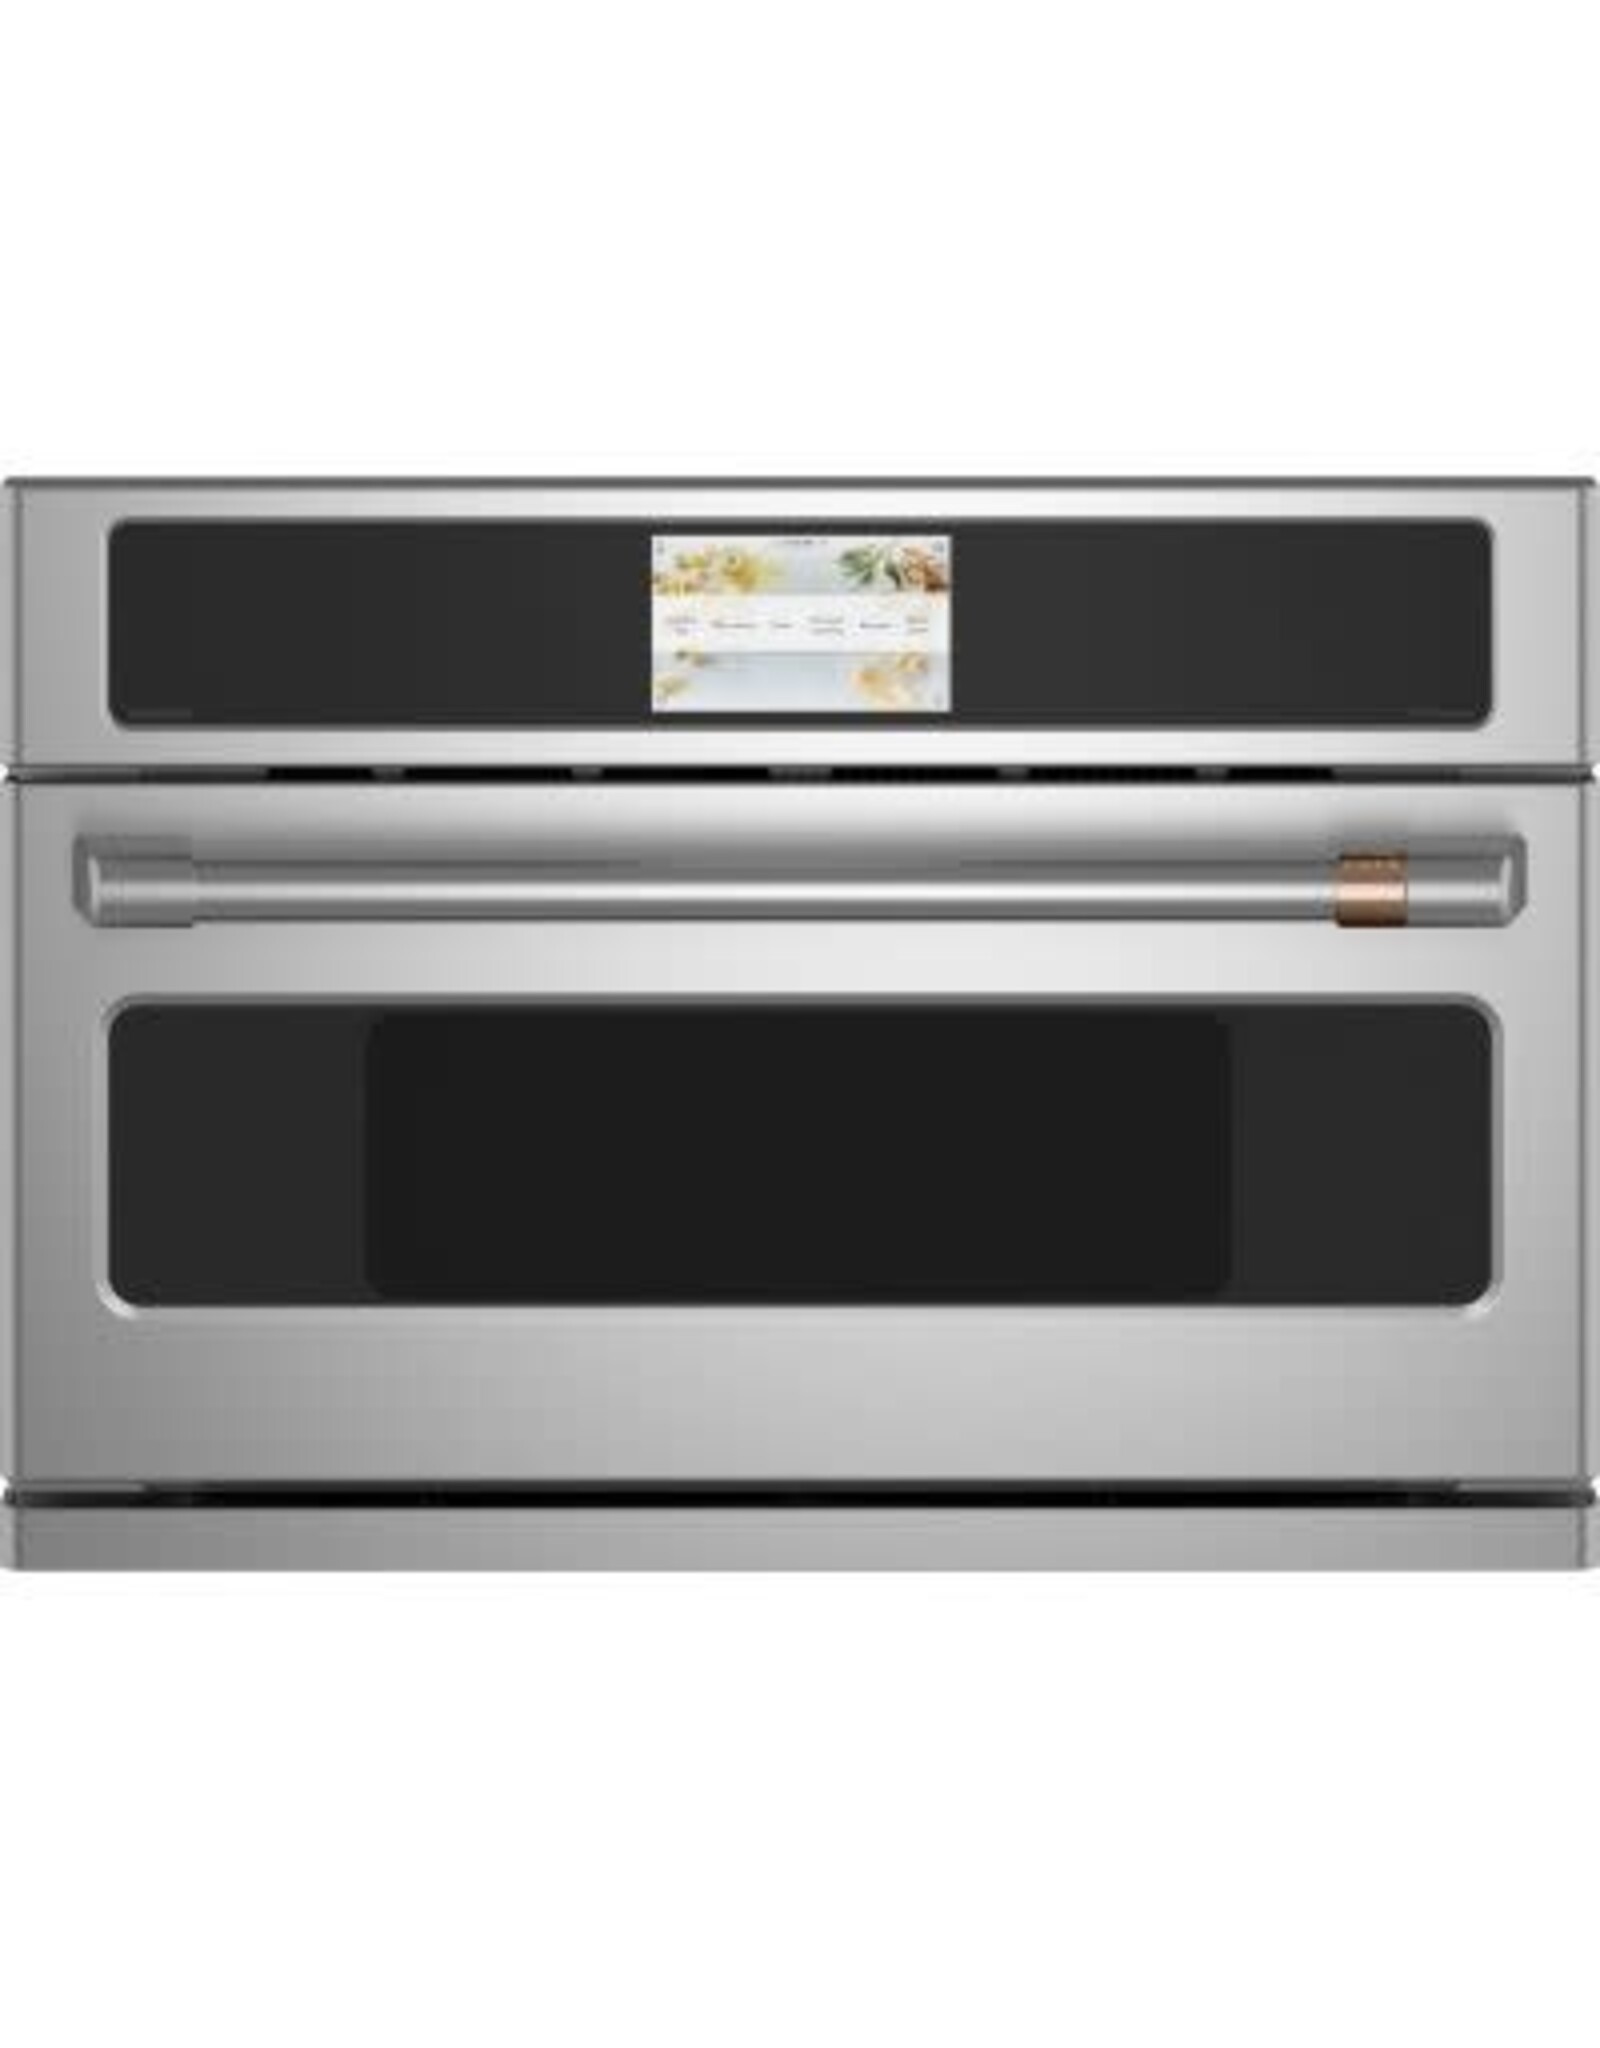 CSB913P2NS1 30 in. 1.7 cu. ft. Smart Electric Wall Oven and Microwave Combo with 120 Volt Advantium Technology in Stainless Steel